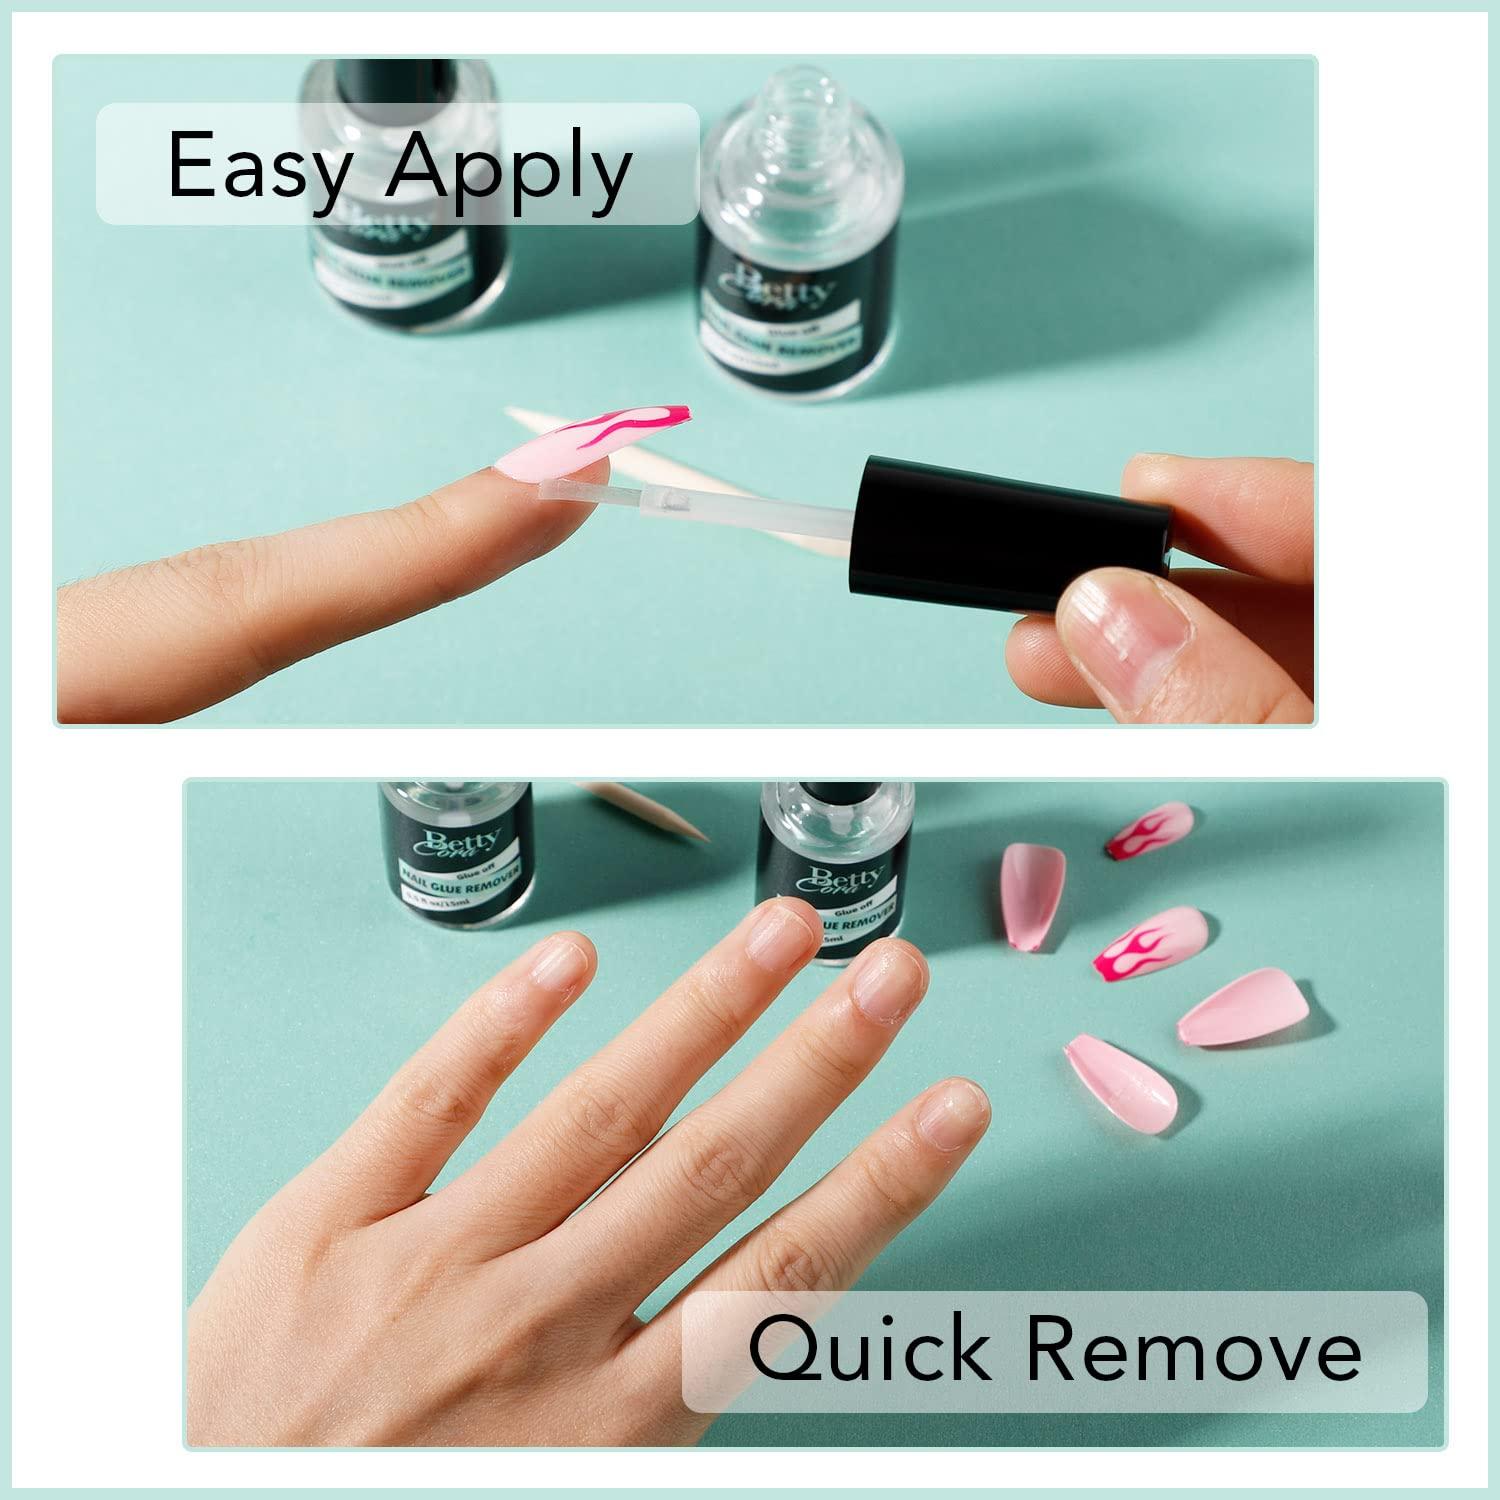 Nail Glue Remover Glue Off for Press ON Nails, BettyCora 15ML False Nails  Glue on Nails Remover Fake Nail Adhesives Remover Nail Glue Debonder with  Wooden Stick 0.5oz A10-Nail Glue Remover